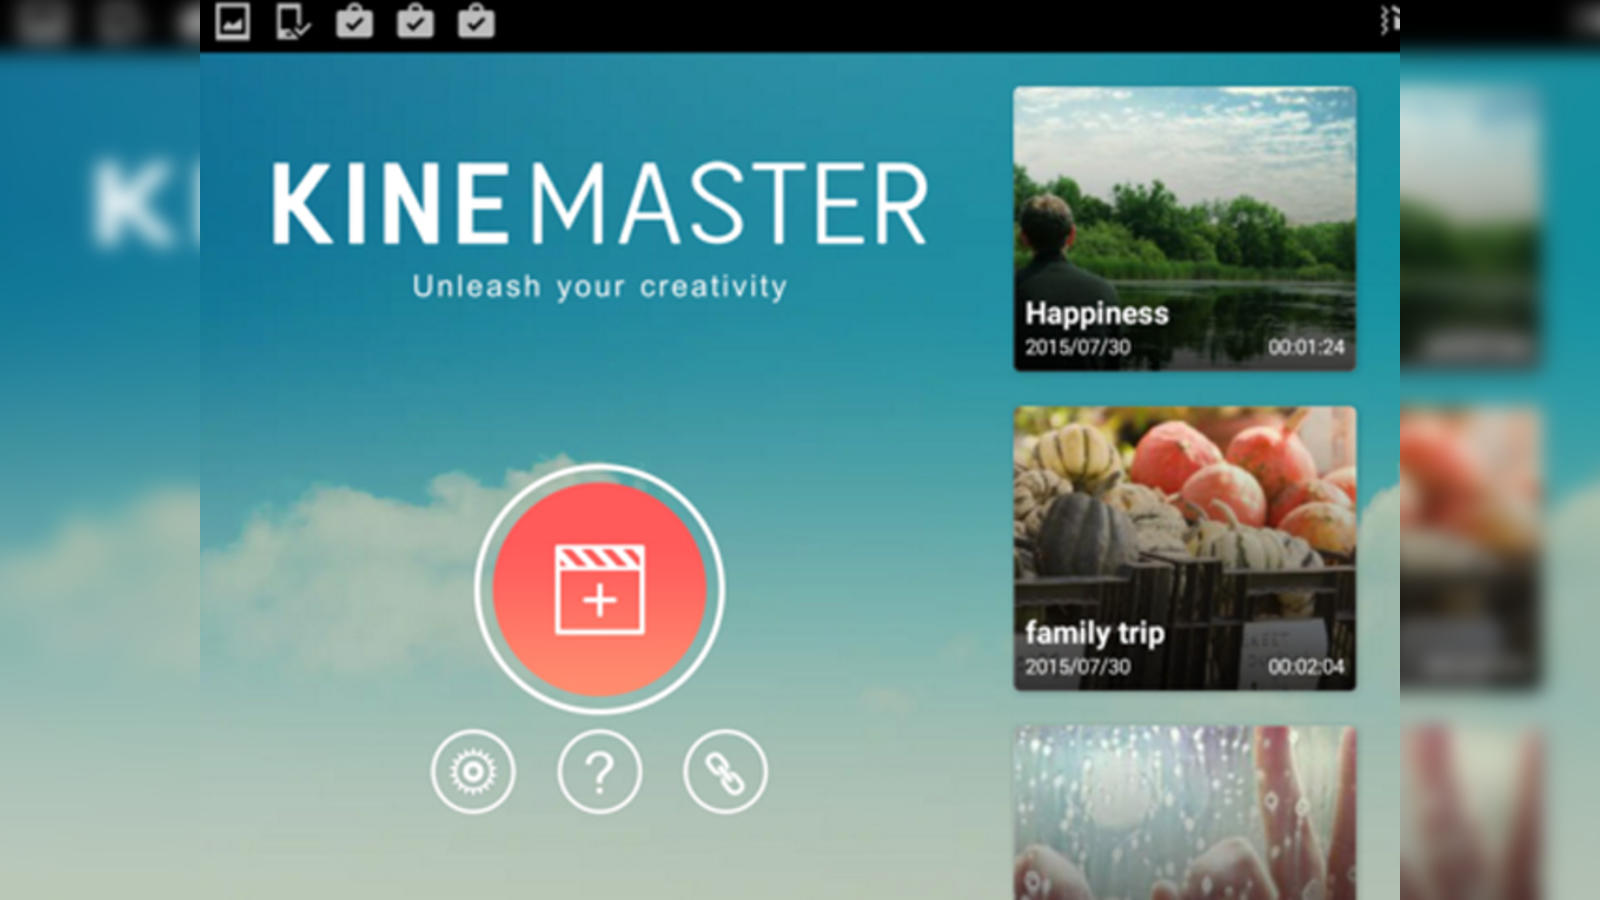 How to Download KineMaster++ App on iOS?